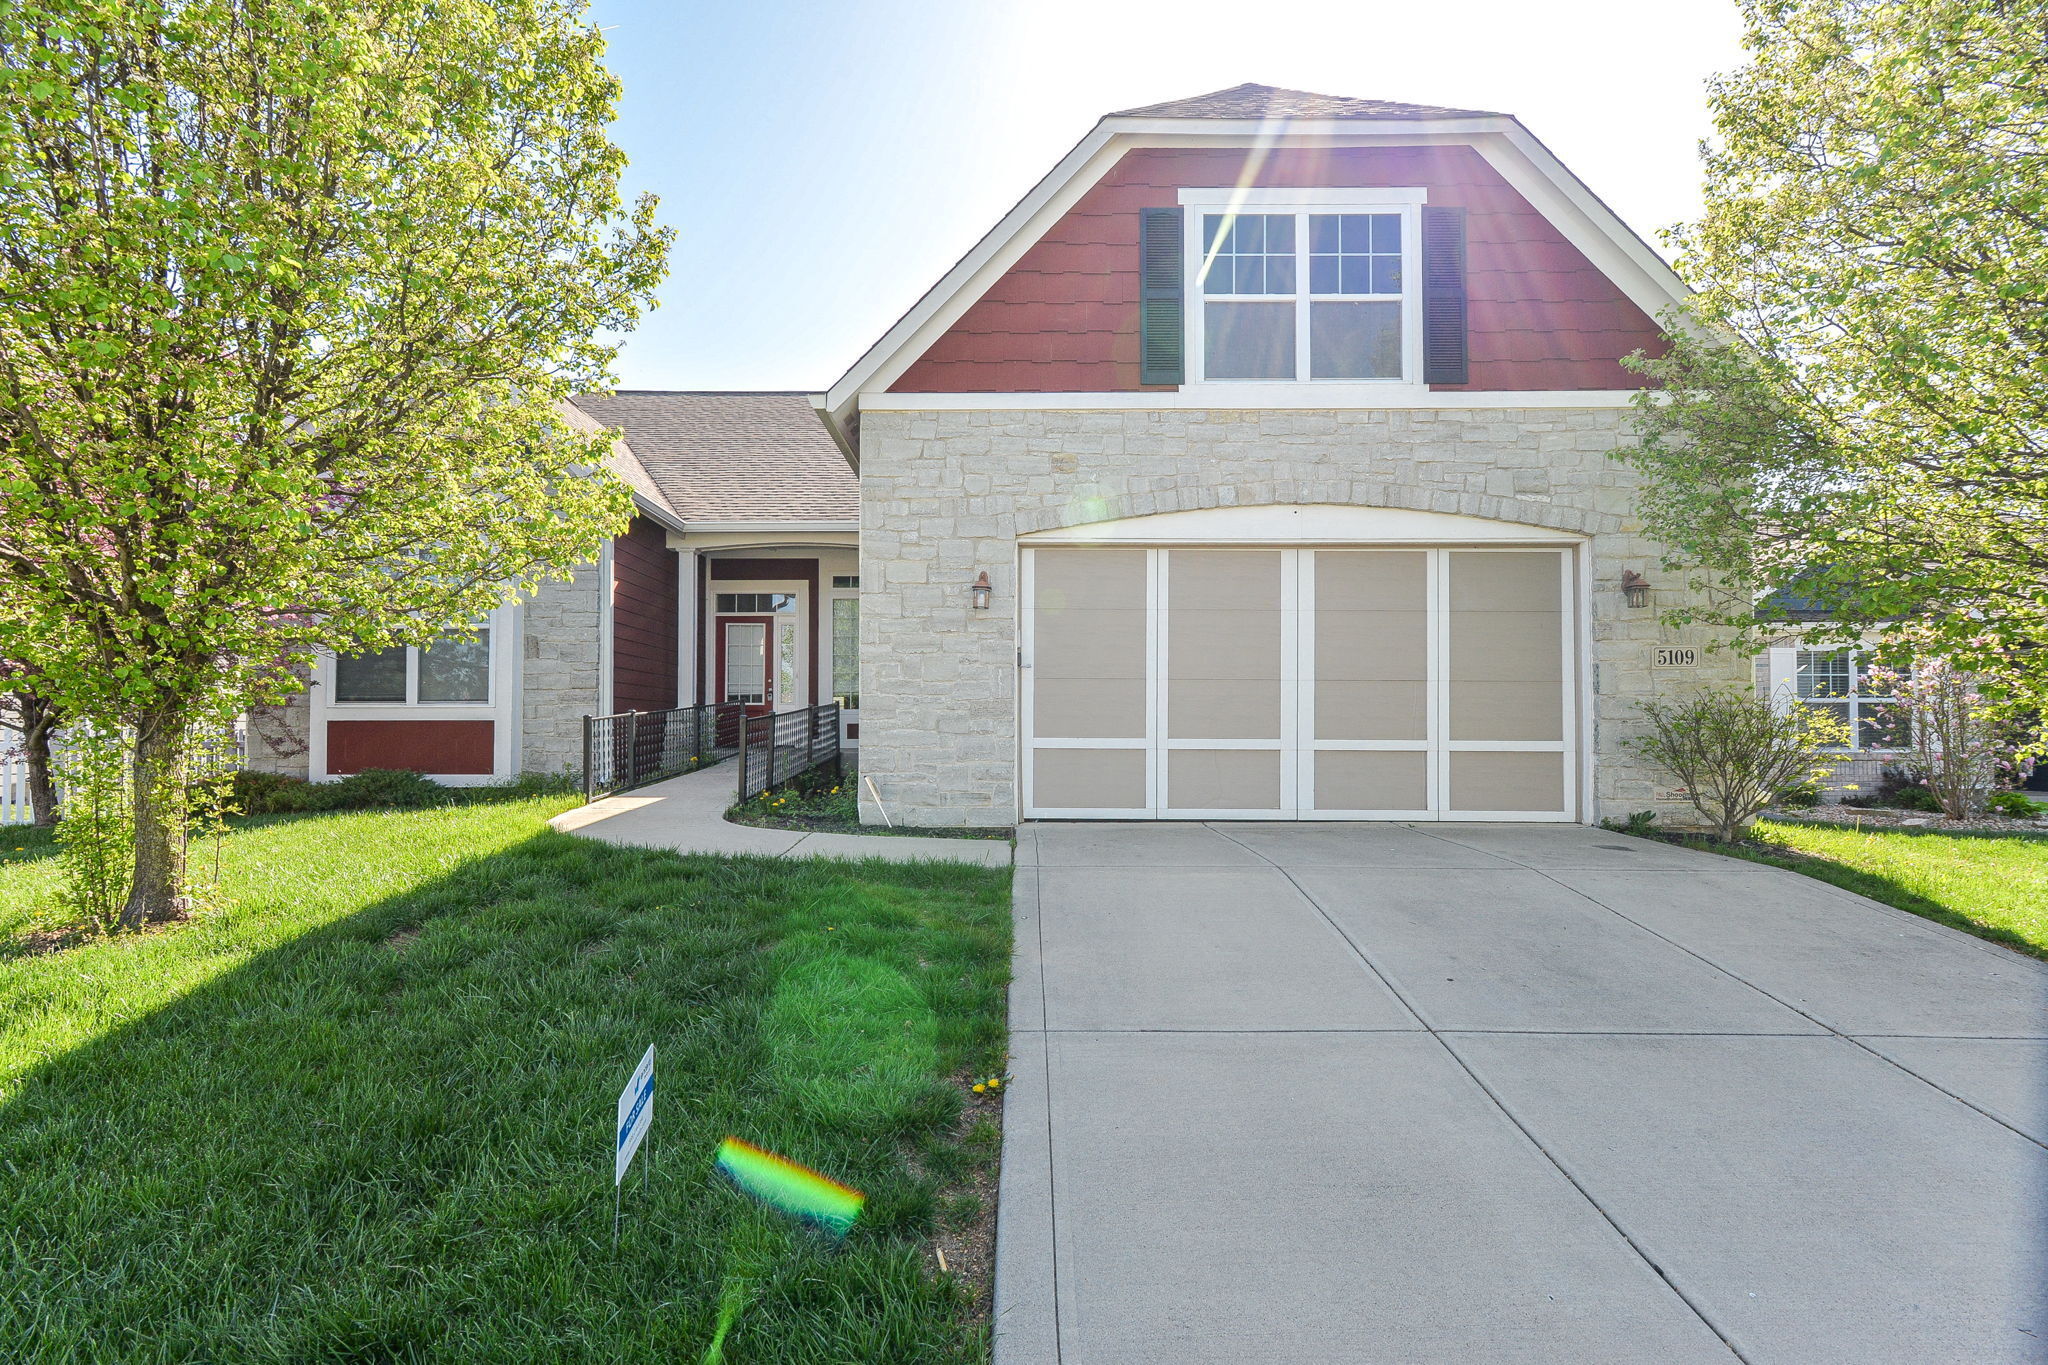 Photo of 5109 Melville Way Indianapolis, IN 46239